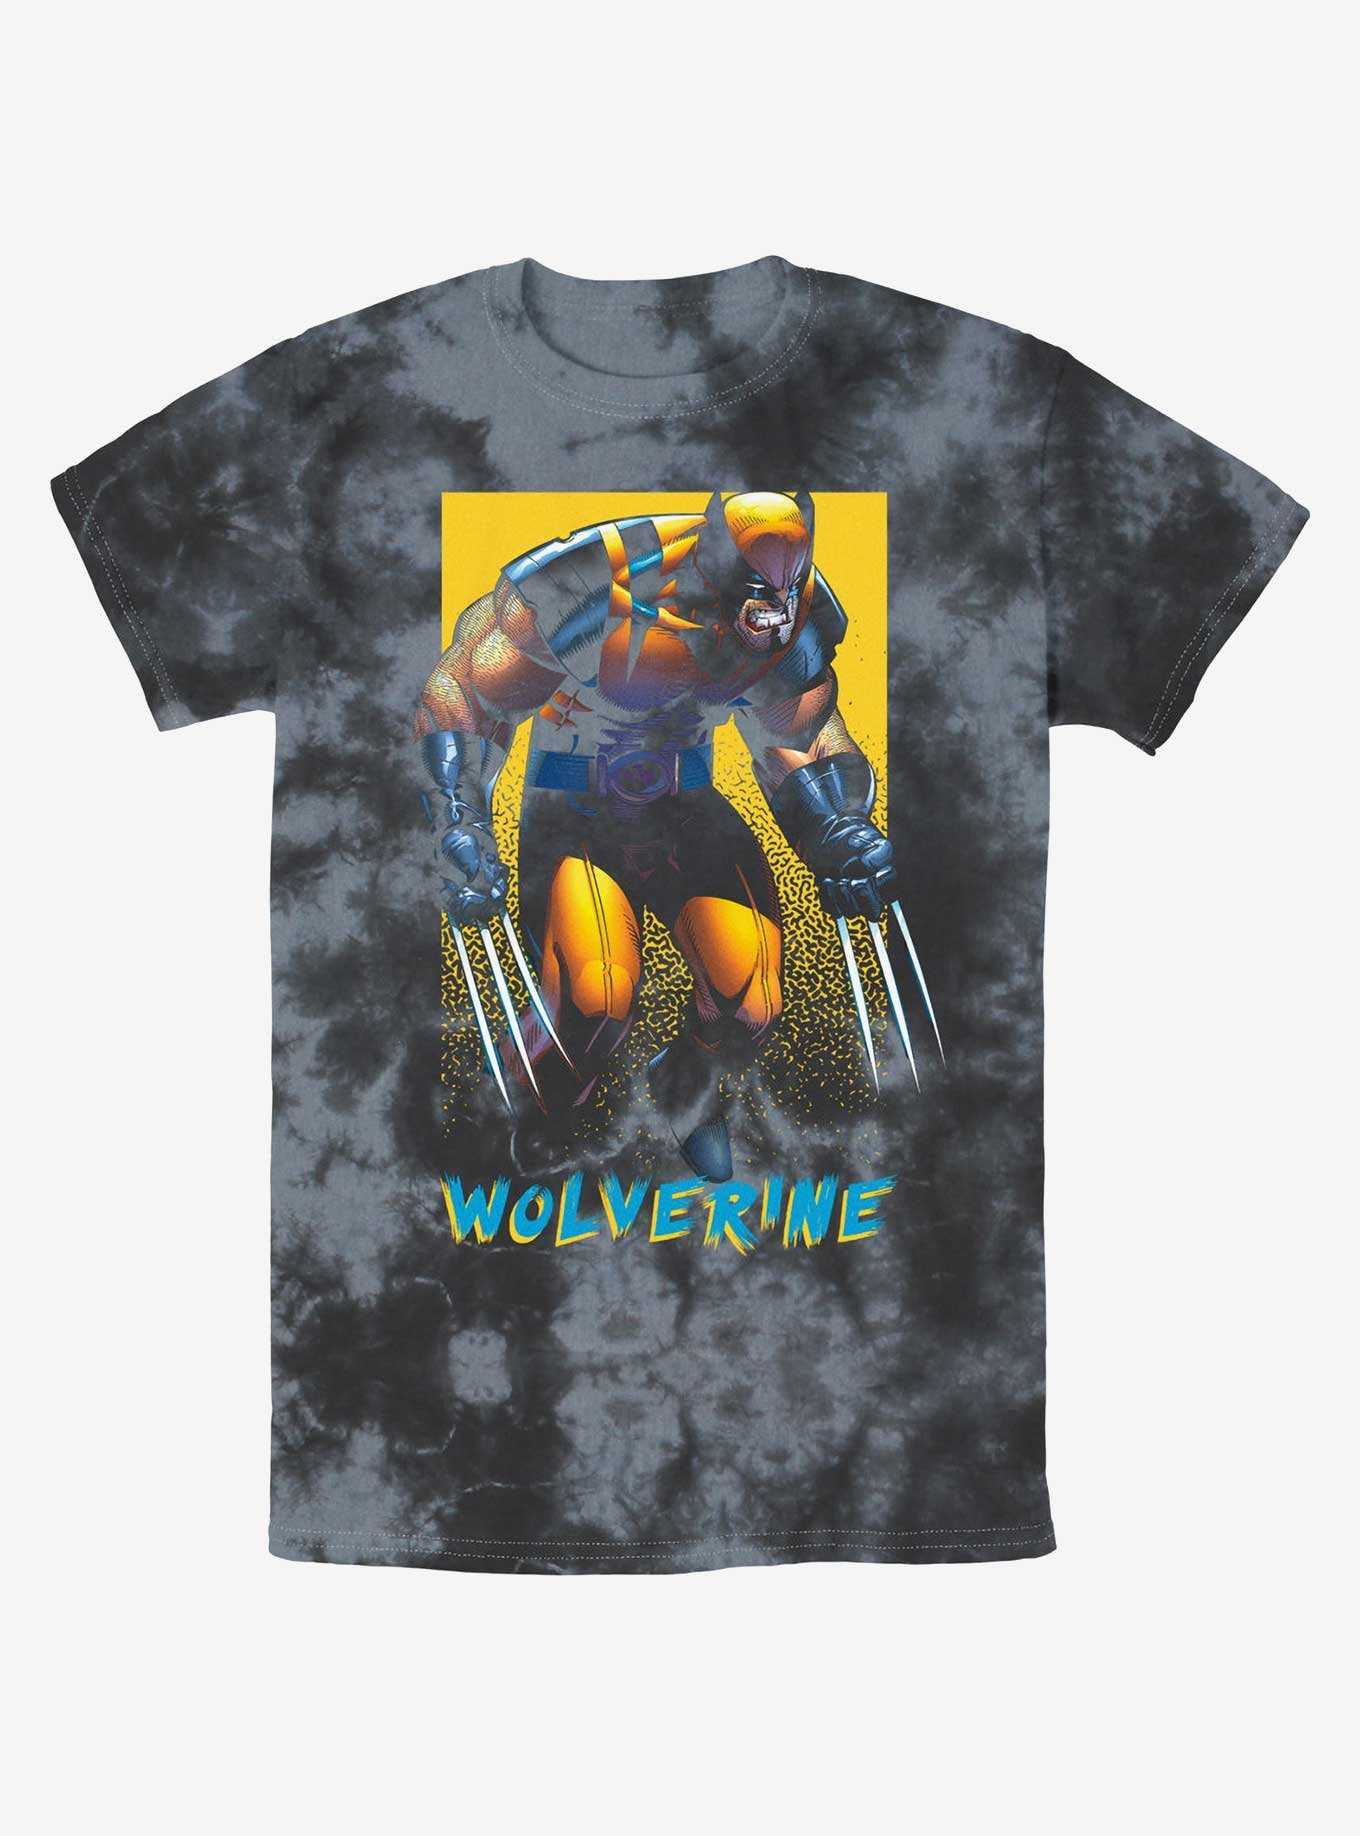 Wolverine Claws Out Poster Tie-Dye T-Shirt, , hi-res